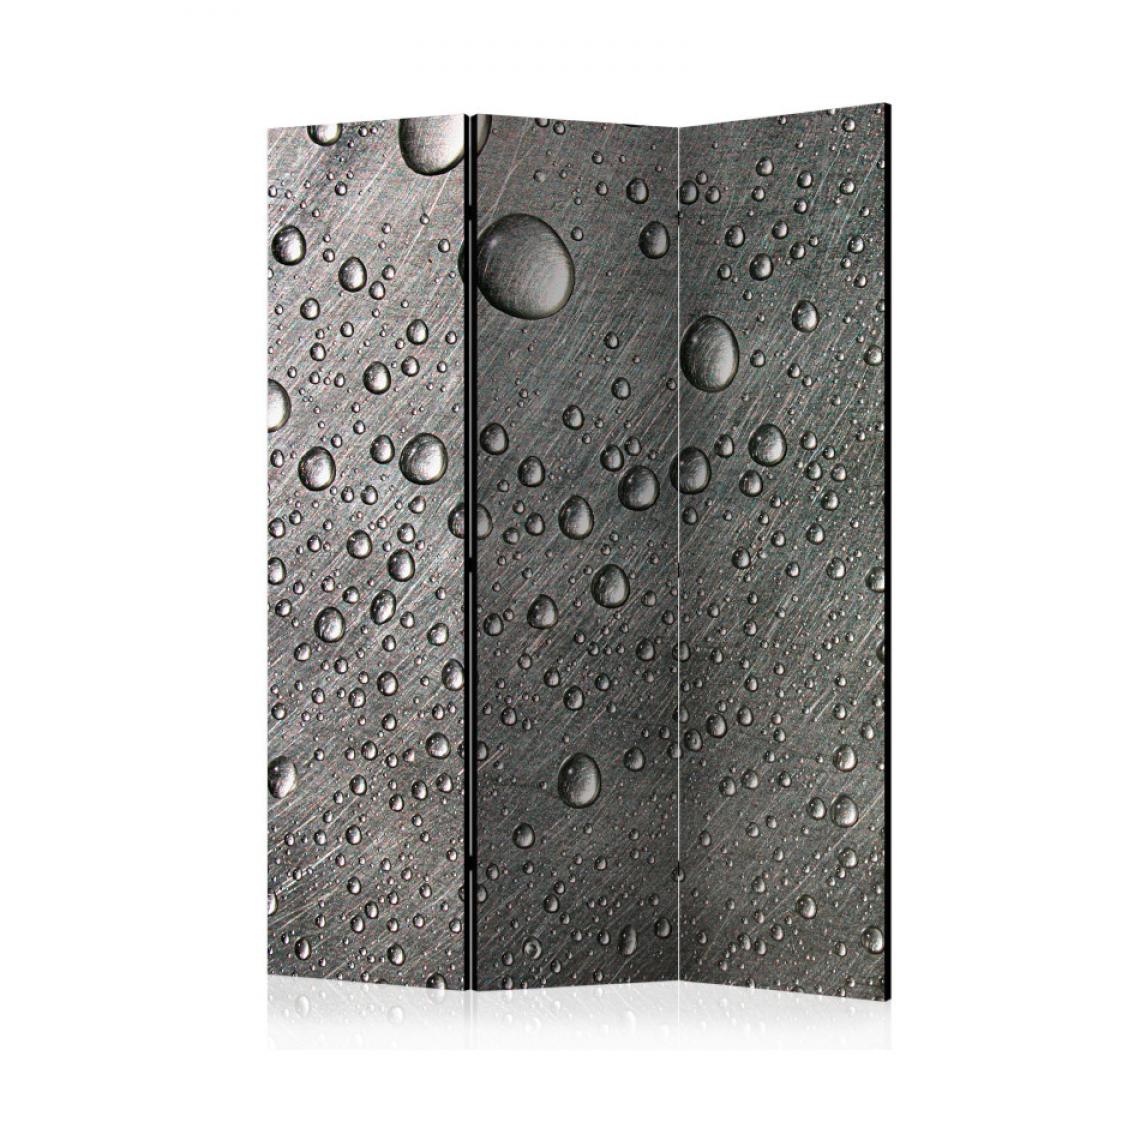 Artgeist - Paravent 3 volets - Steel surface with water drops [Room Dividers] 135x172 - Paravents